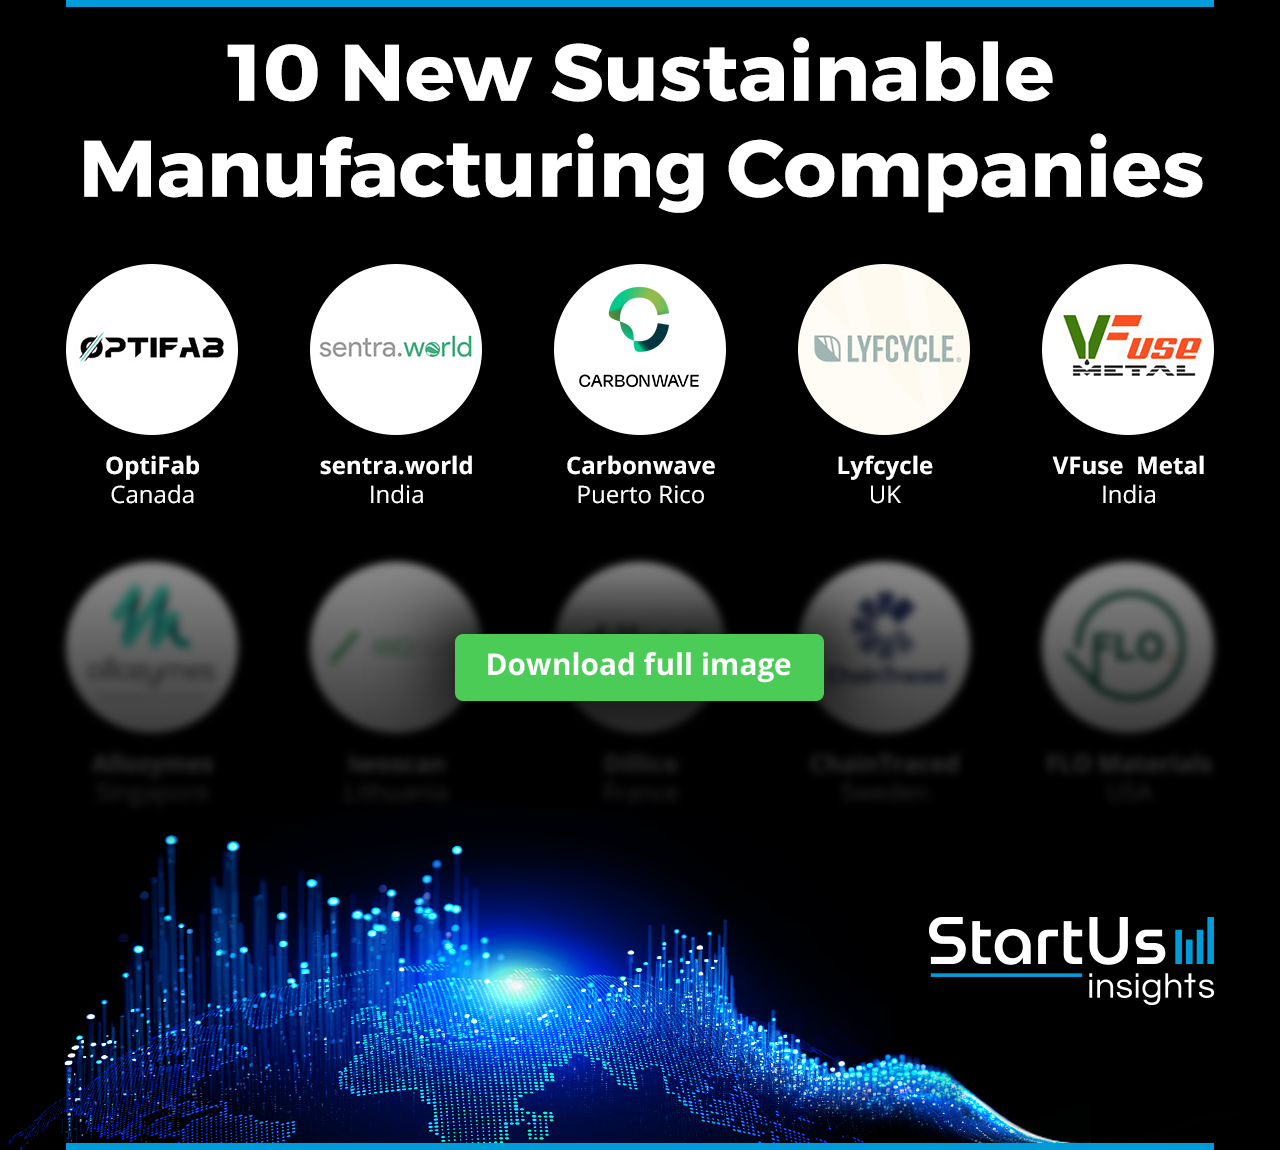 New-Sustainable-Manufacturing-Companies-Logos-Blurred-StartUs-Insights-noresize